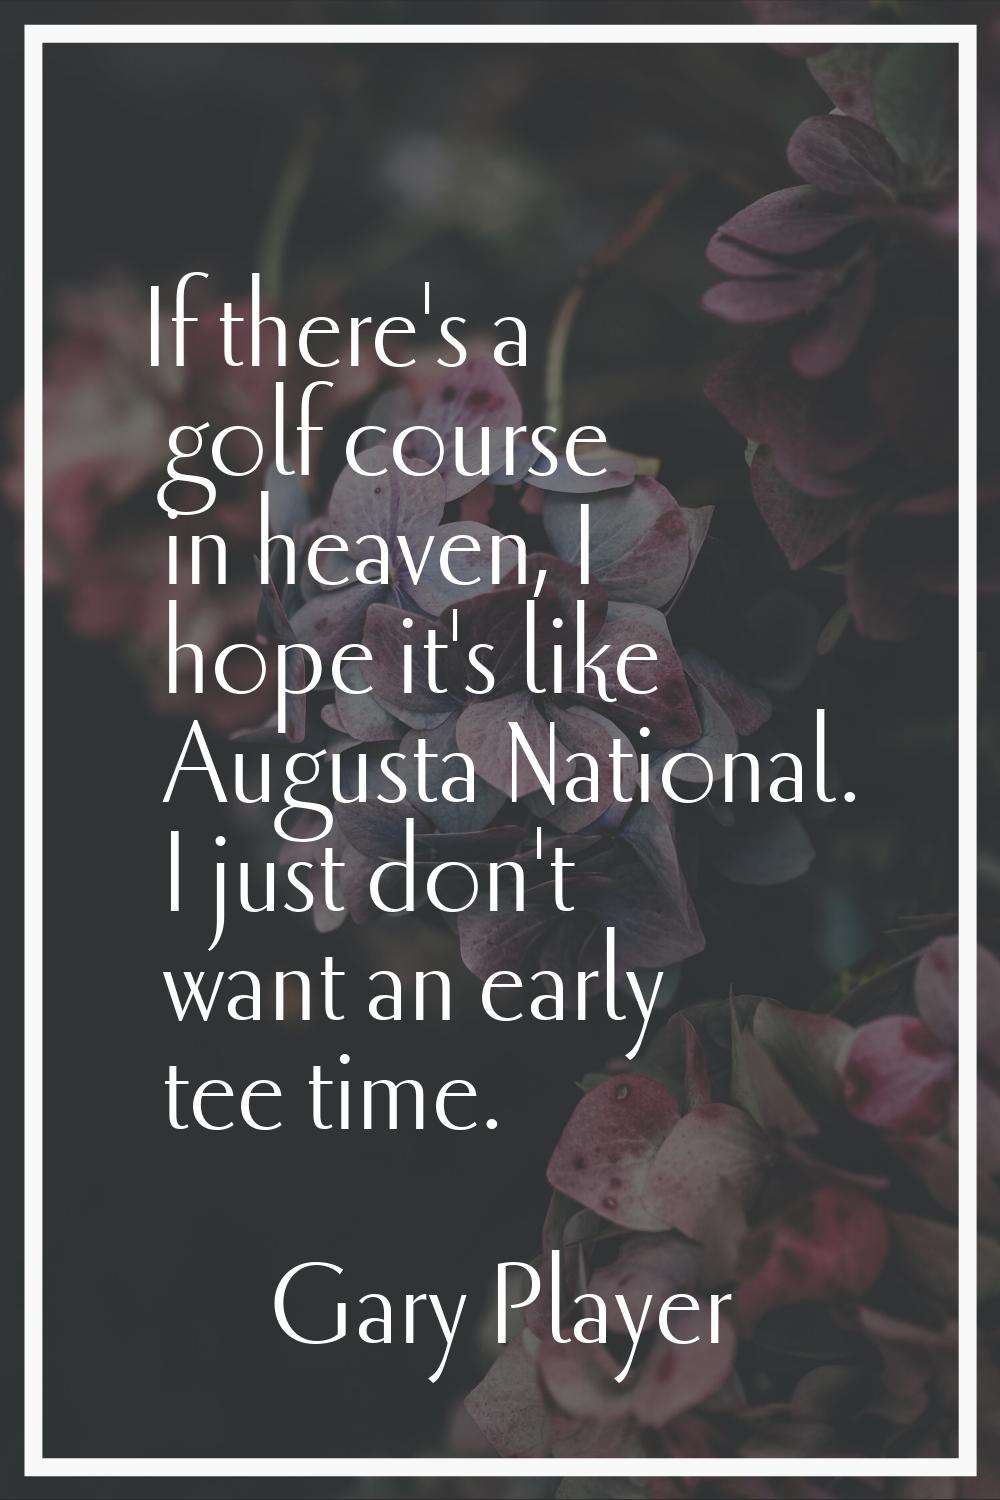 If there's a golf course in heaven, I hope it's like Augusta National. I just don't want an early t